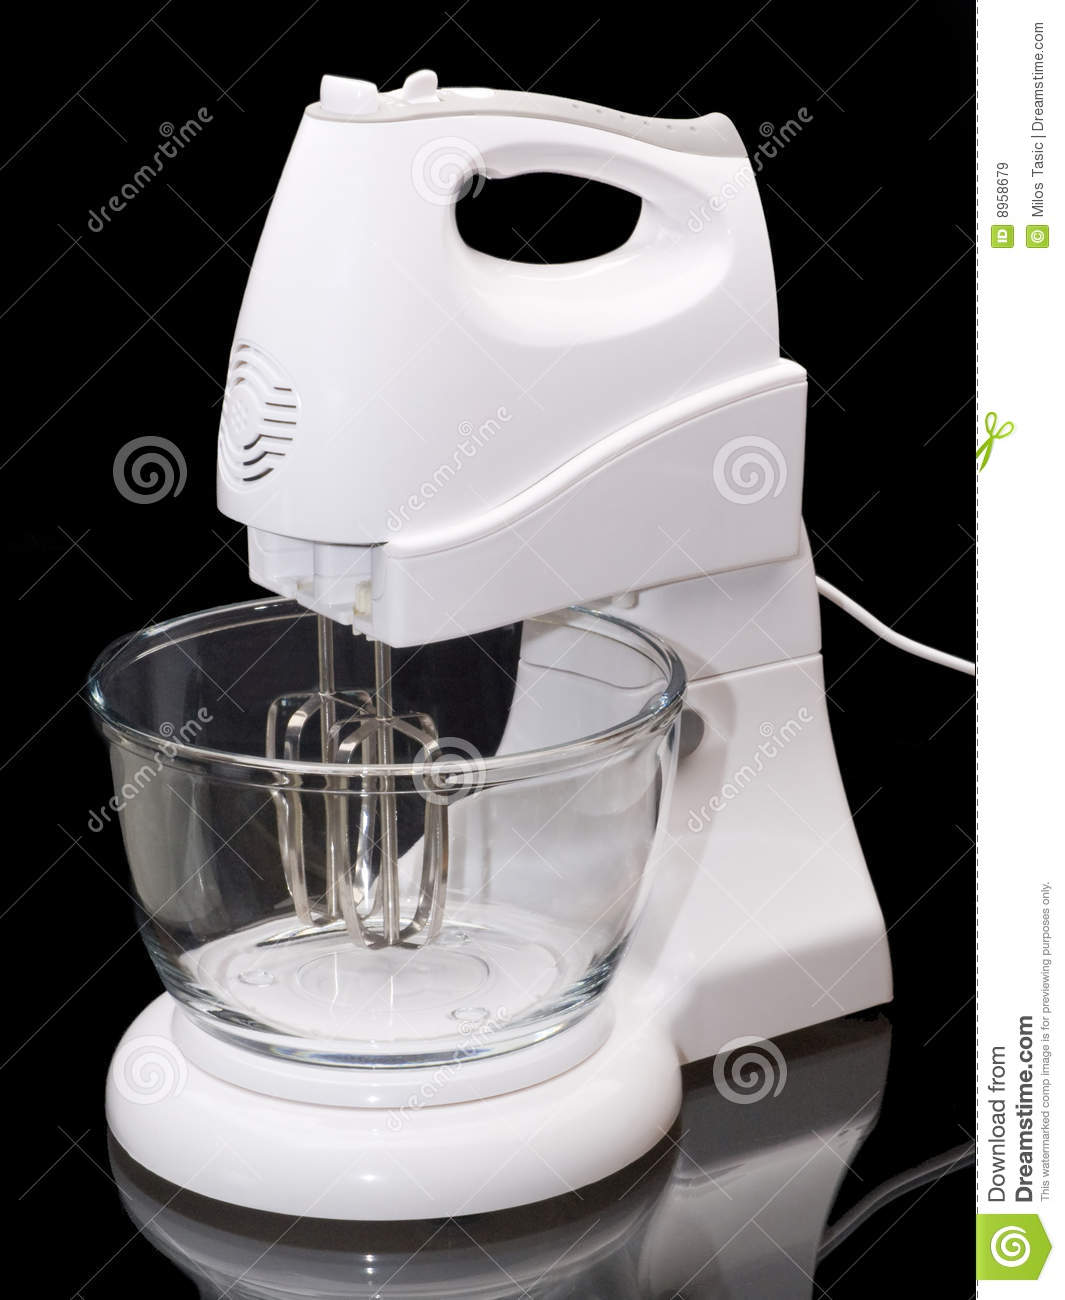 Electric Stand Mixer Royalty Free Stock Images   Image  8958679